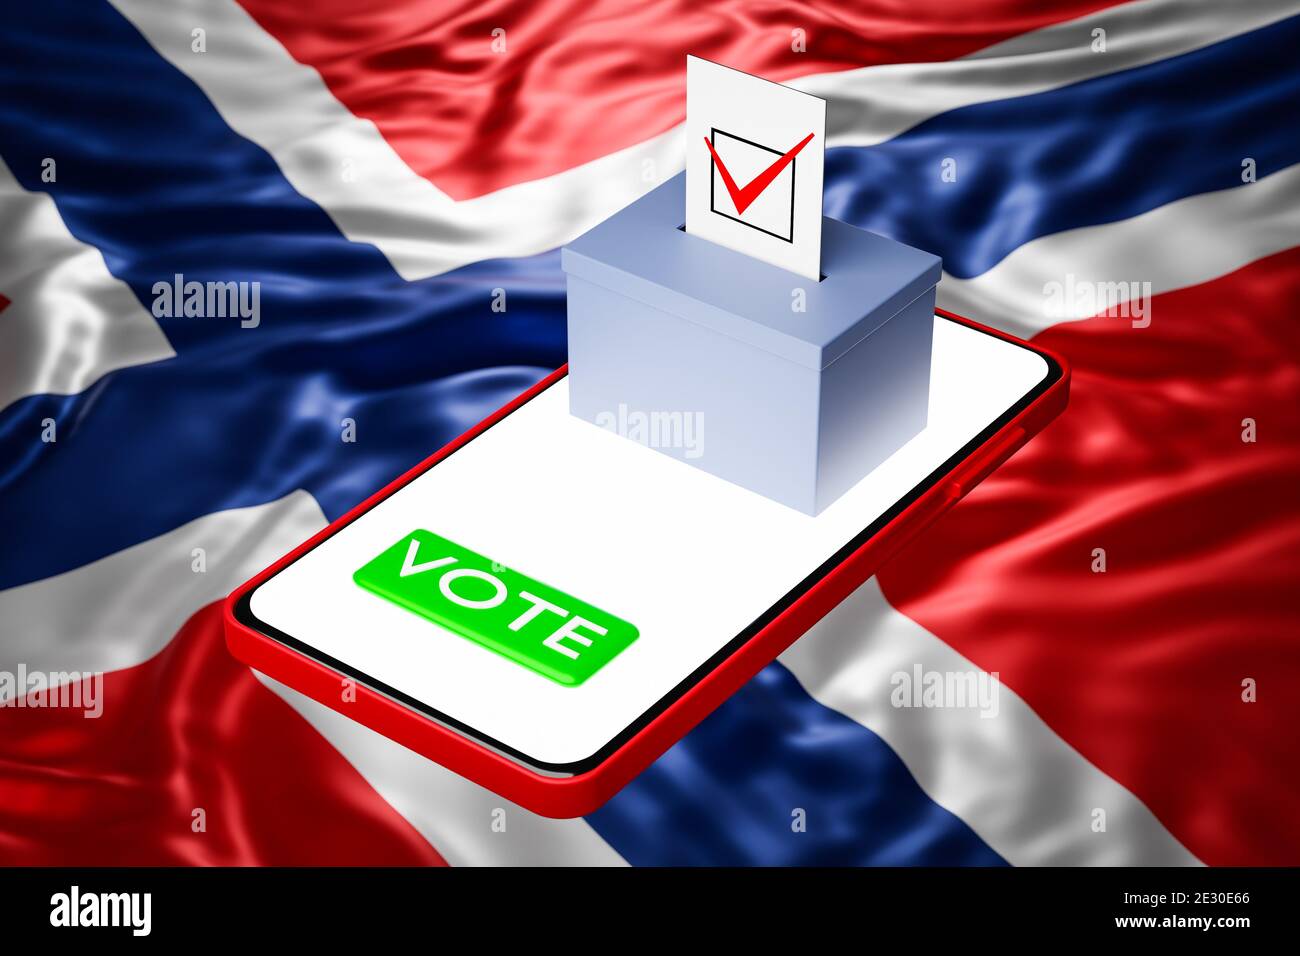 3d illustration of a voting box with a billboard standing on a smartphone, with the national flag of Norway in the background. Online voting concept, Stock Photo